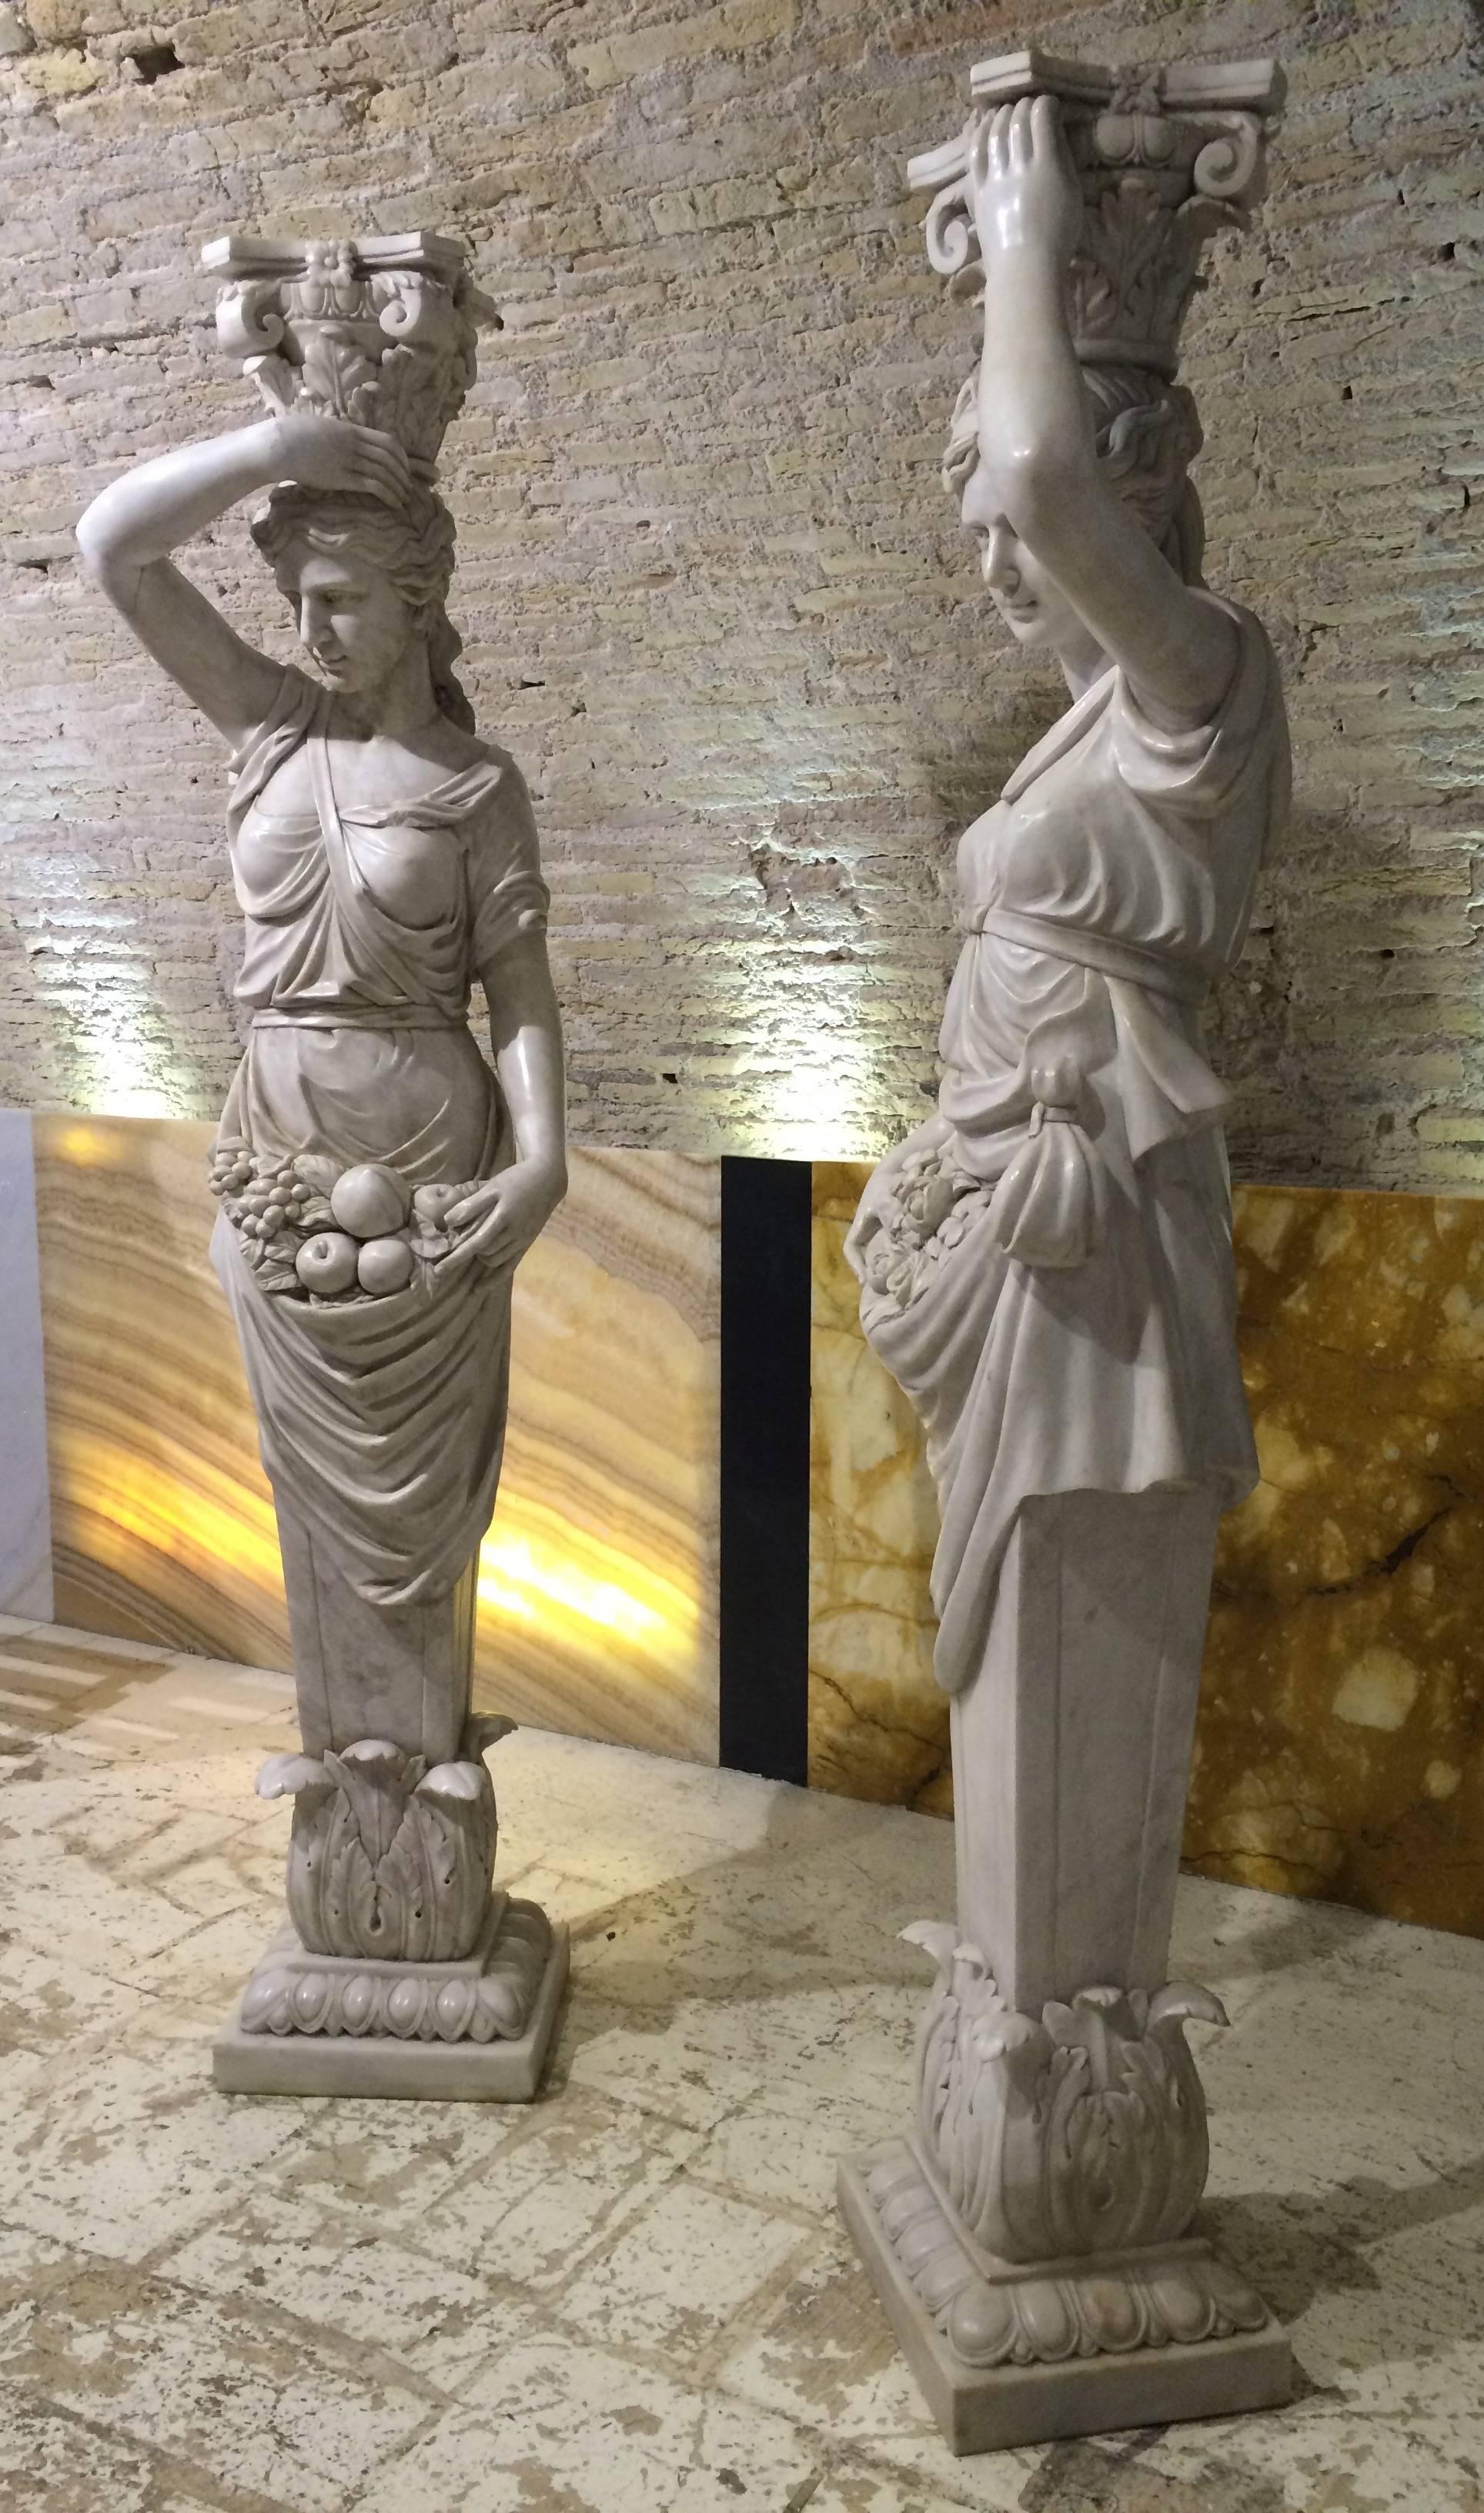 A pair of superlative italian caryatids carved in white marbles; the caryatid is female figure serving as an architectural support taking the place of a column or a pillar supporting an entablature on her head. The Greek term karyatides literally